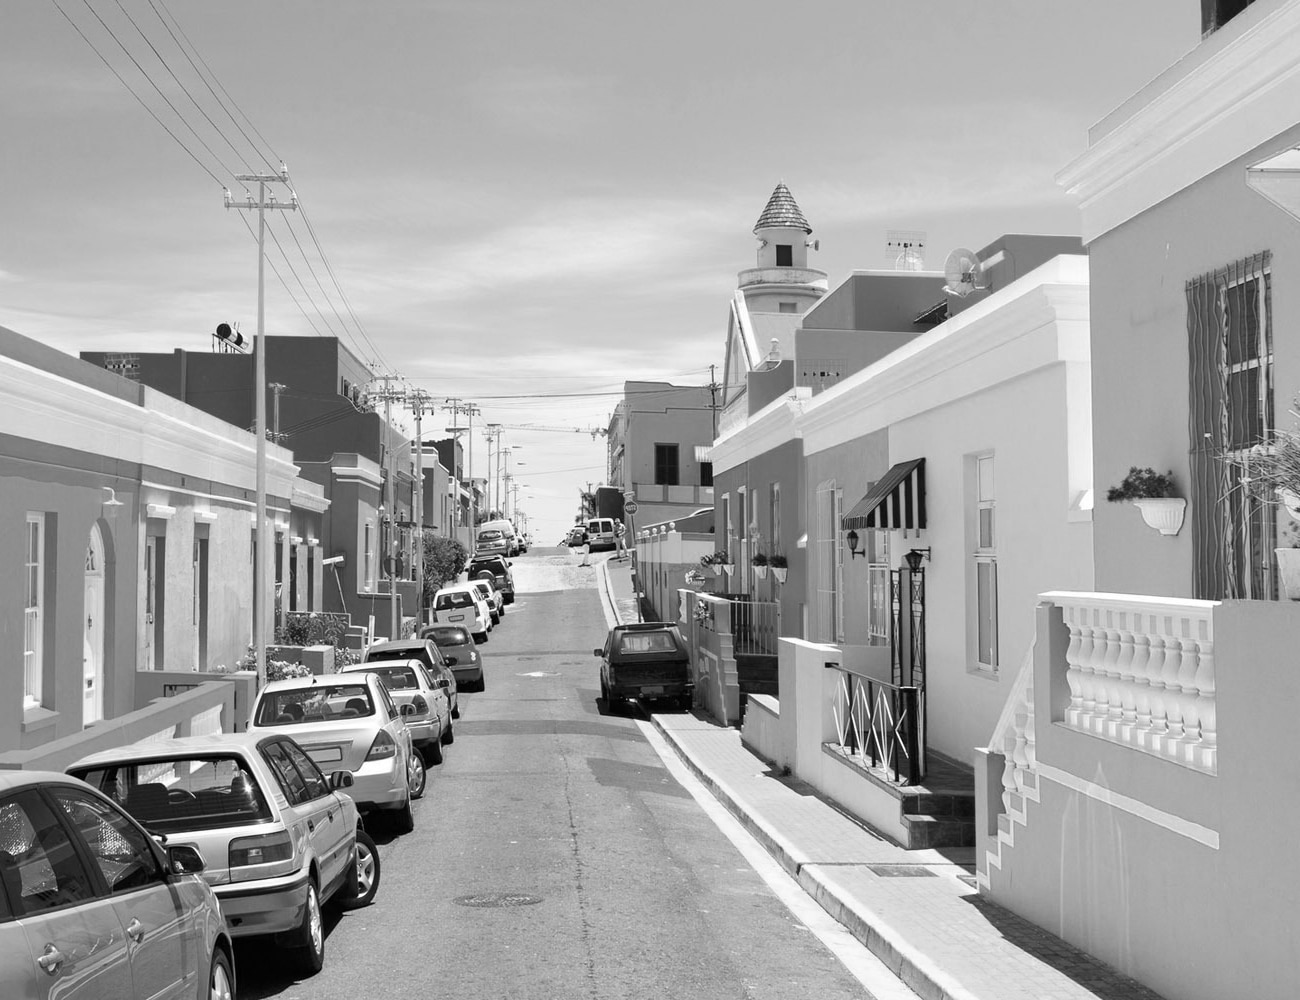 The Streets of Bo-Kaap Neighborhood in South Africa